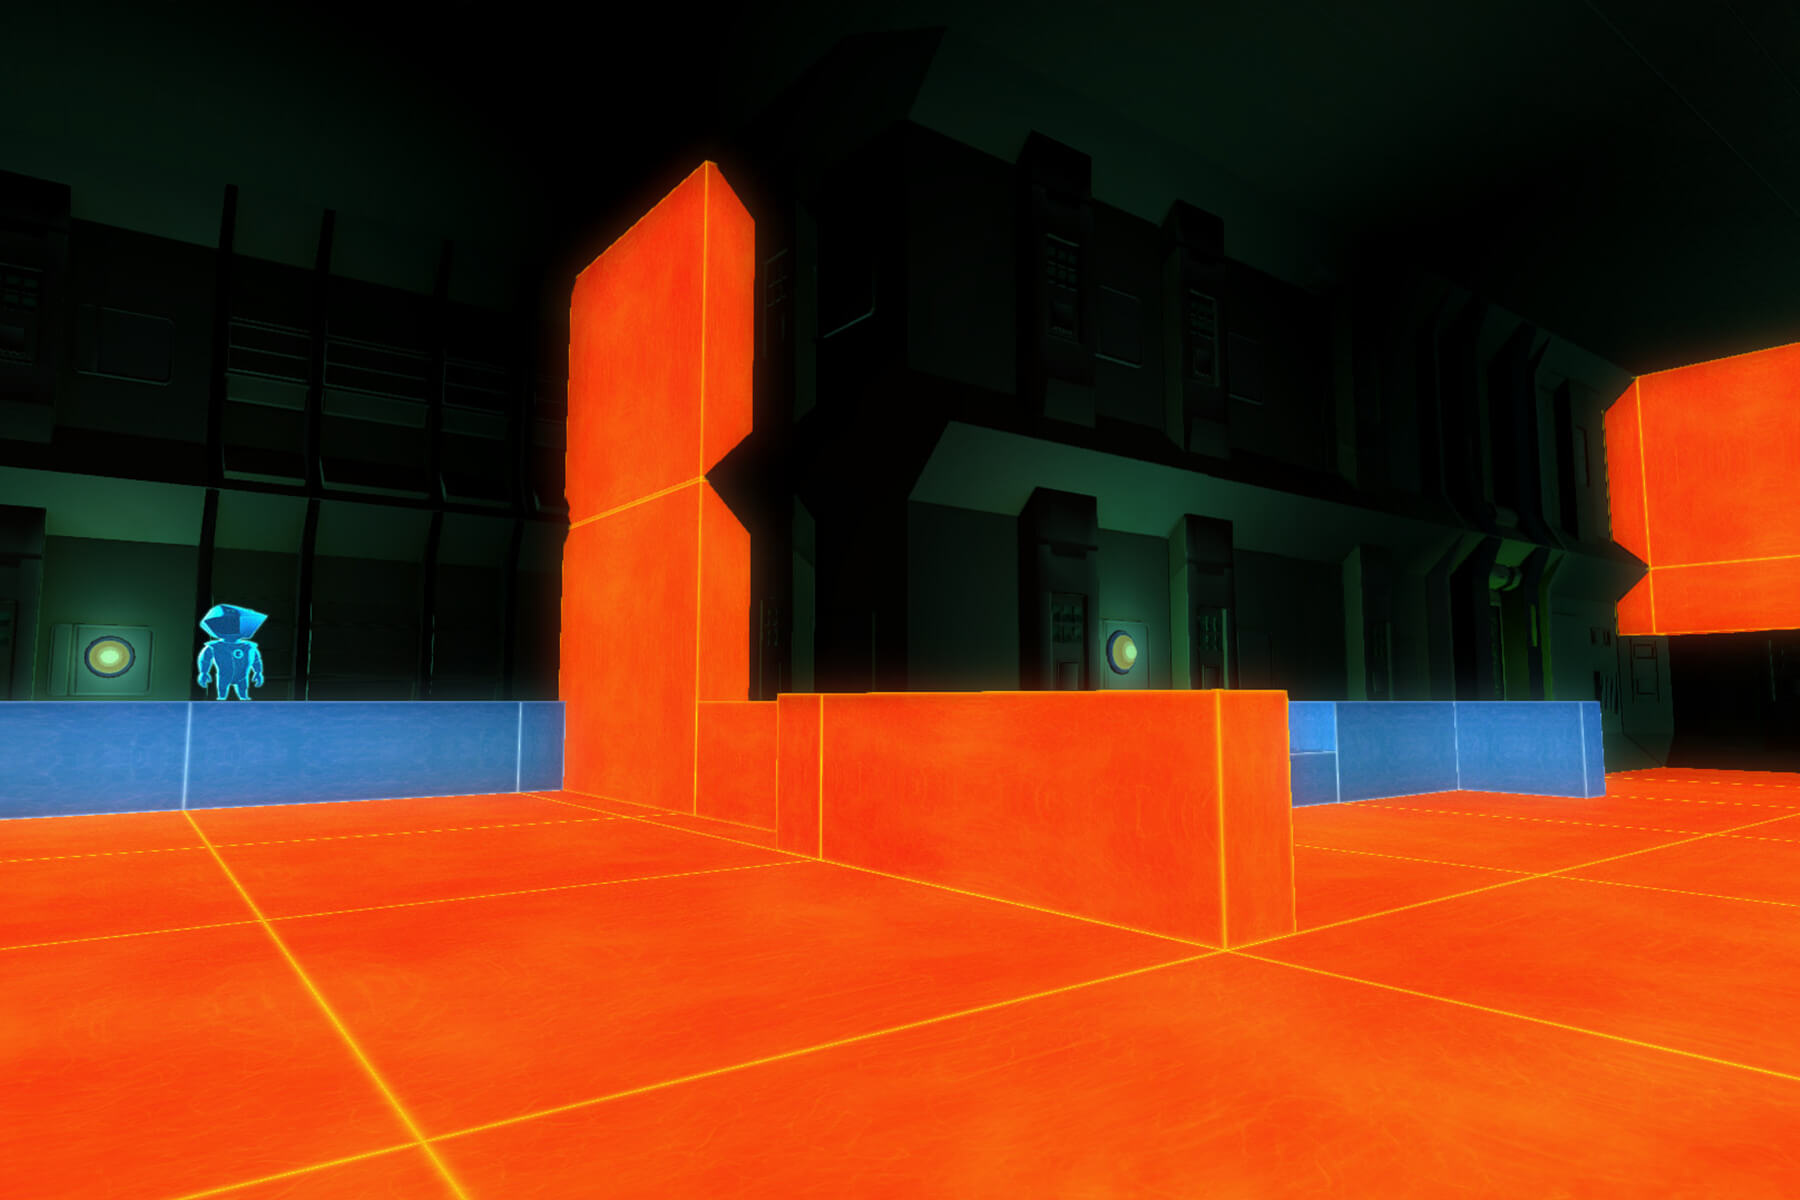 A screenshot from DigiPen game “Perspective,” depicting a blue and orange game level.